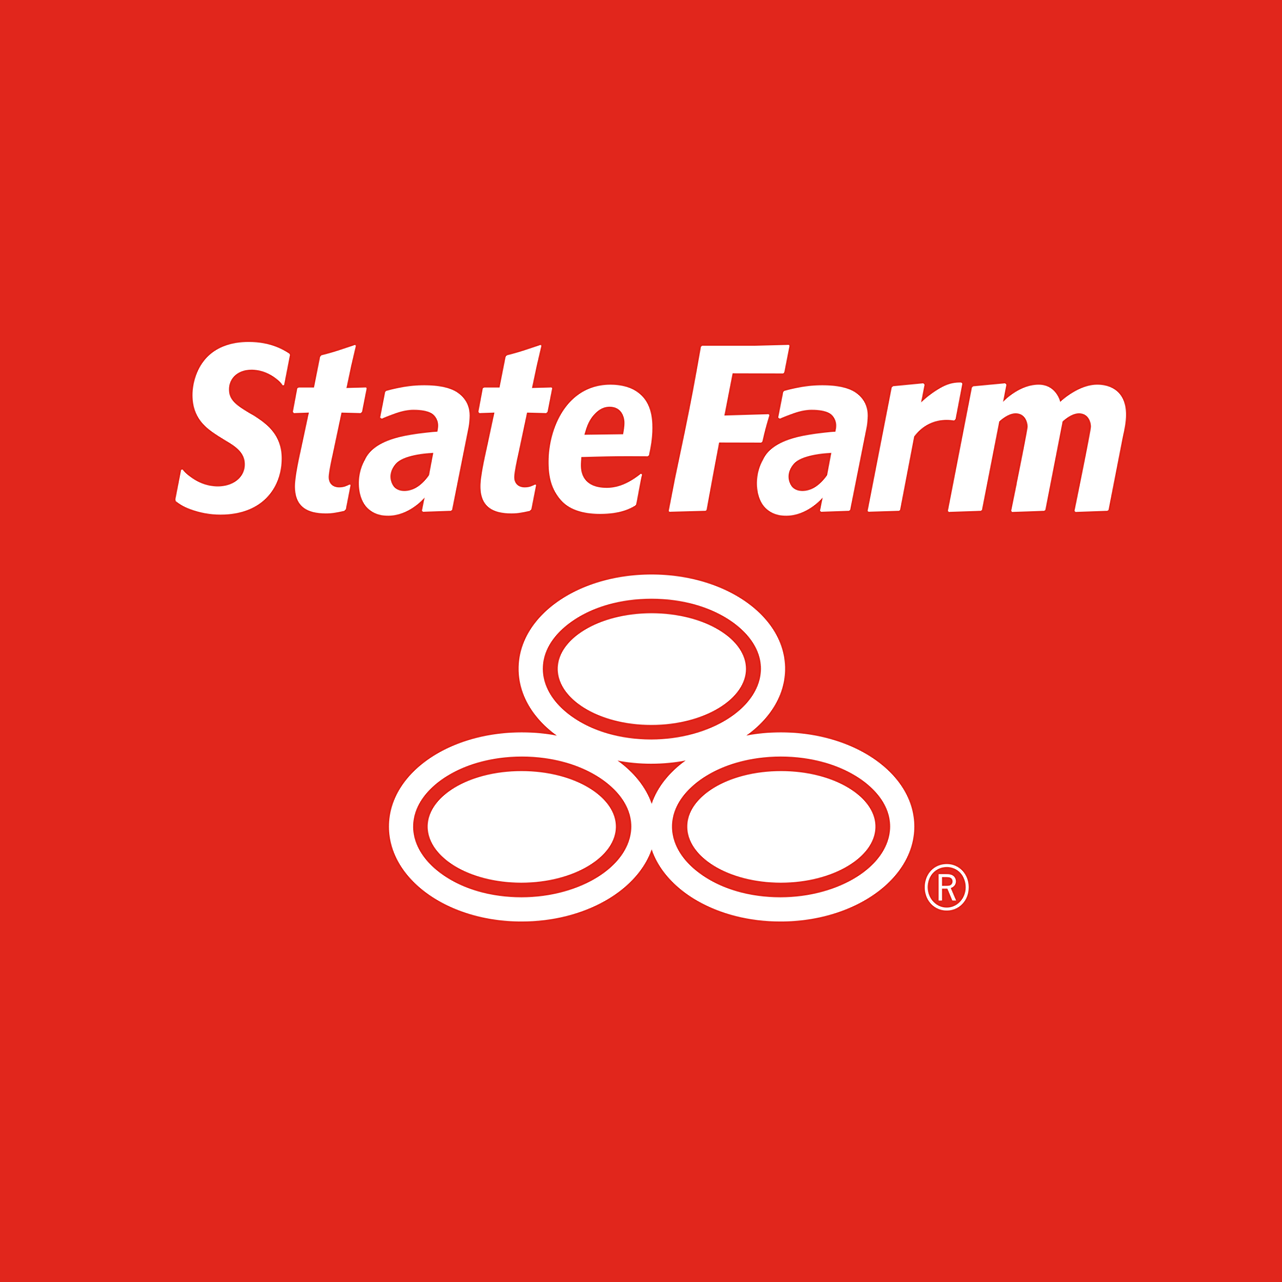 State Farm's 2023 NFL Campaign – Current Marketing News and Advertising  Trends worth talking about